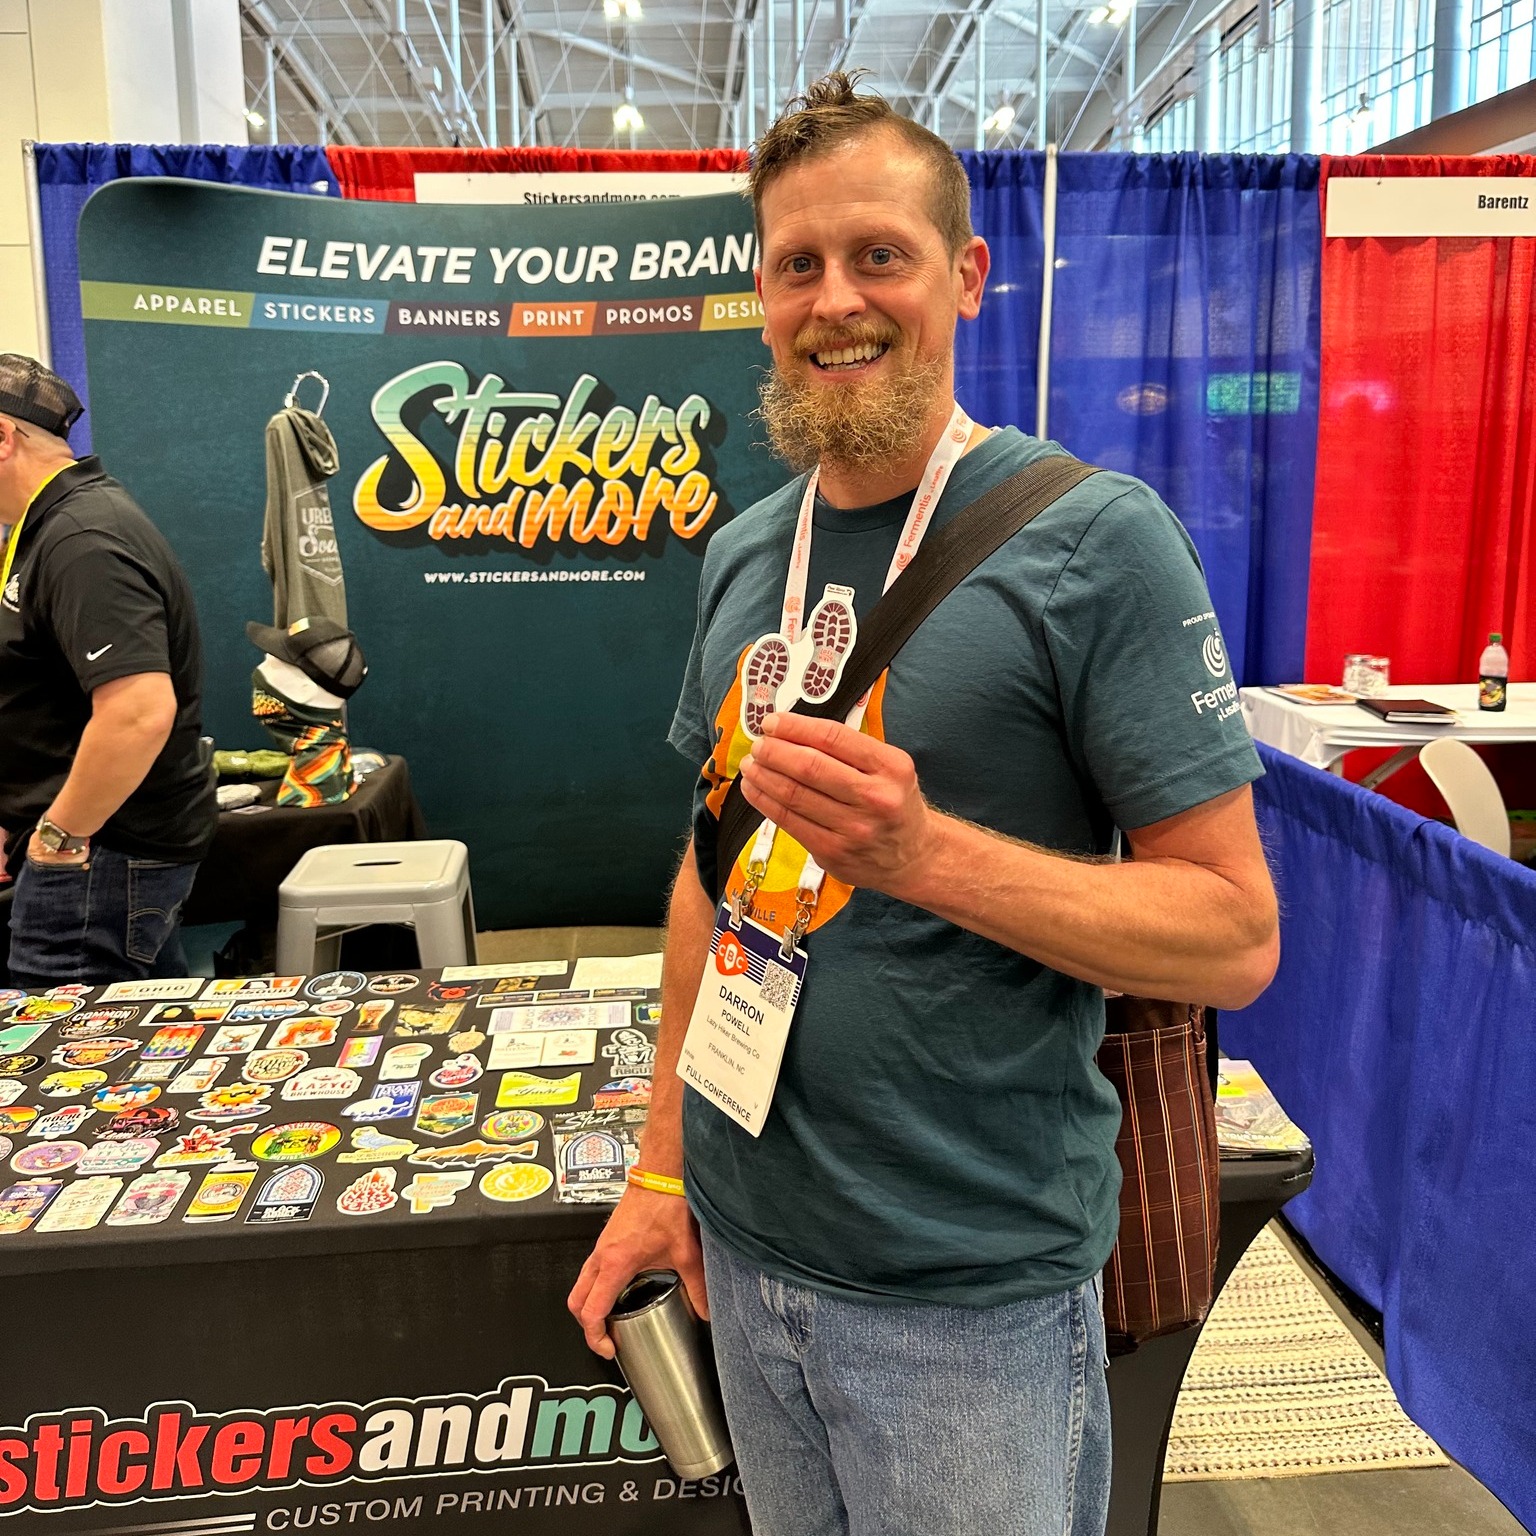 It is so awesome to see our happy customers at our booth. Thank you Darron from Lazy Hiker Brewing Co. for stoping by and seeing us at the CBC National Conference. Need some great merch to highlight your amazing brand. Check out our website and so how we can help elevate your brand.
https://stickersandmore.com/brewery/
@lazyhikerbrewing Brewers Association @brewersassoc #brewerylife🍺 #merch #customstickers #brewery